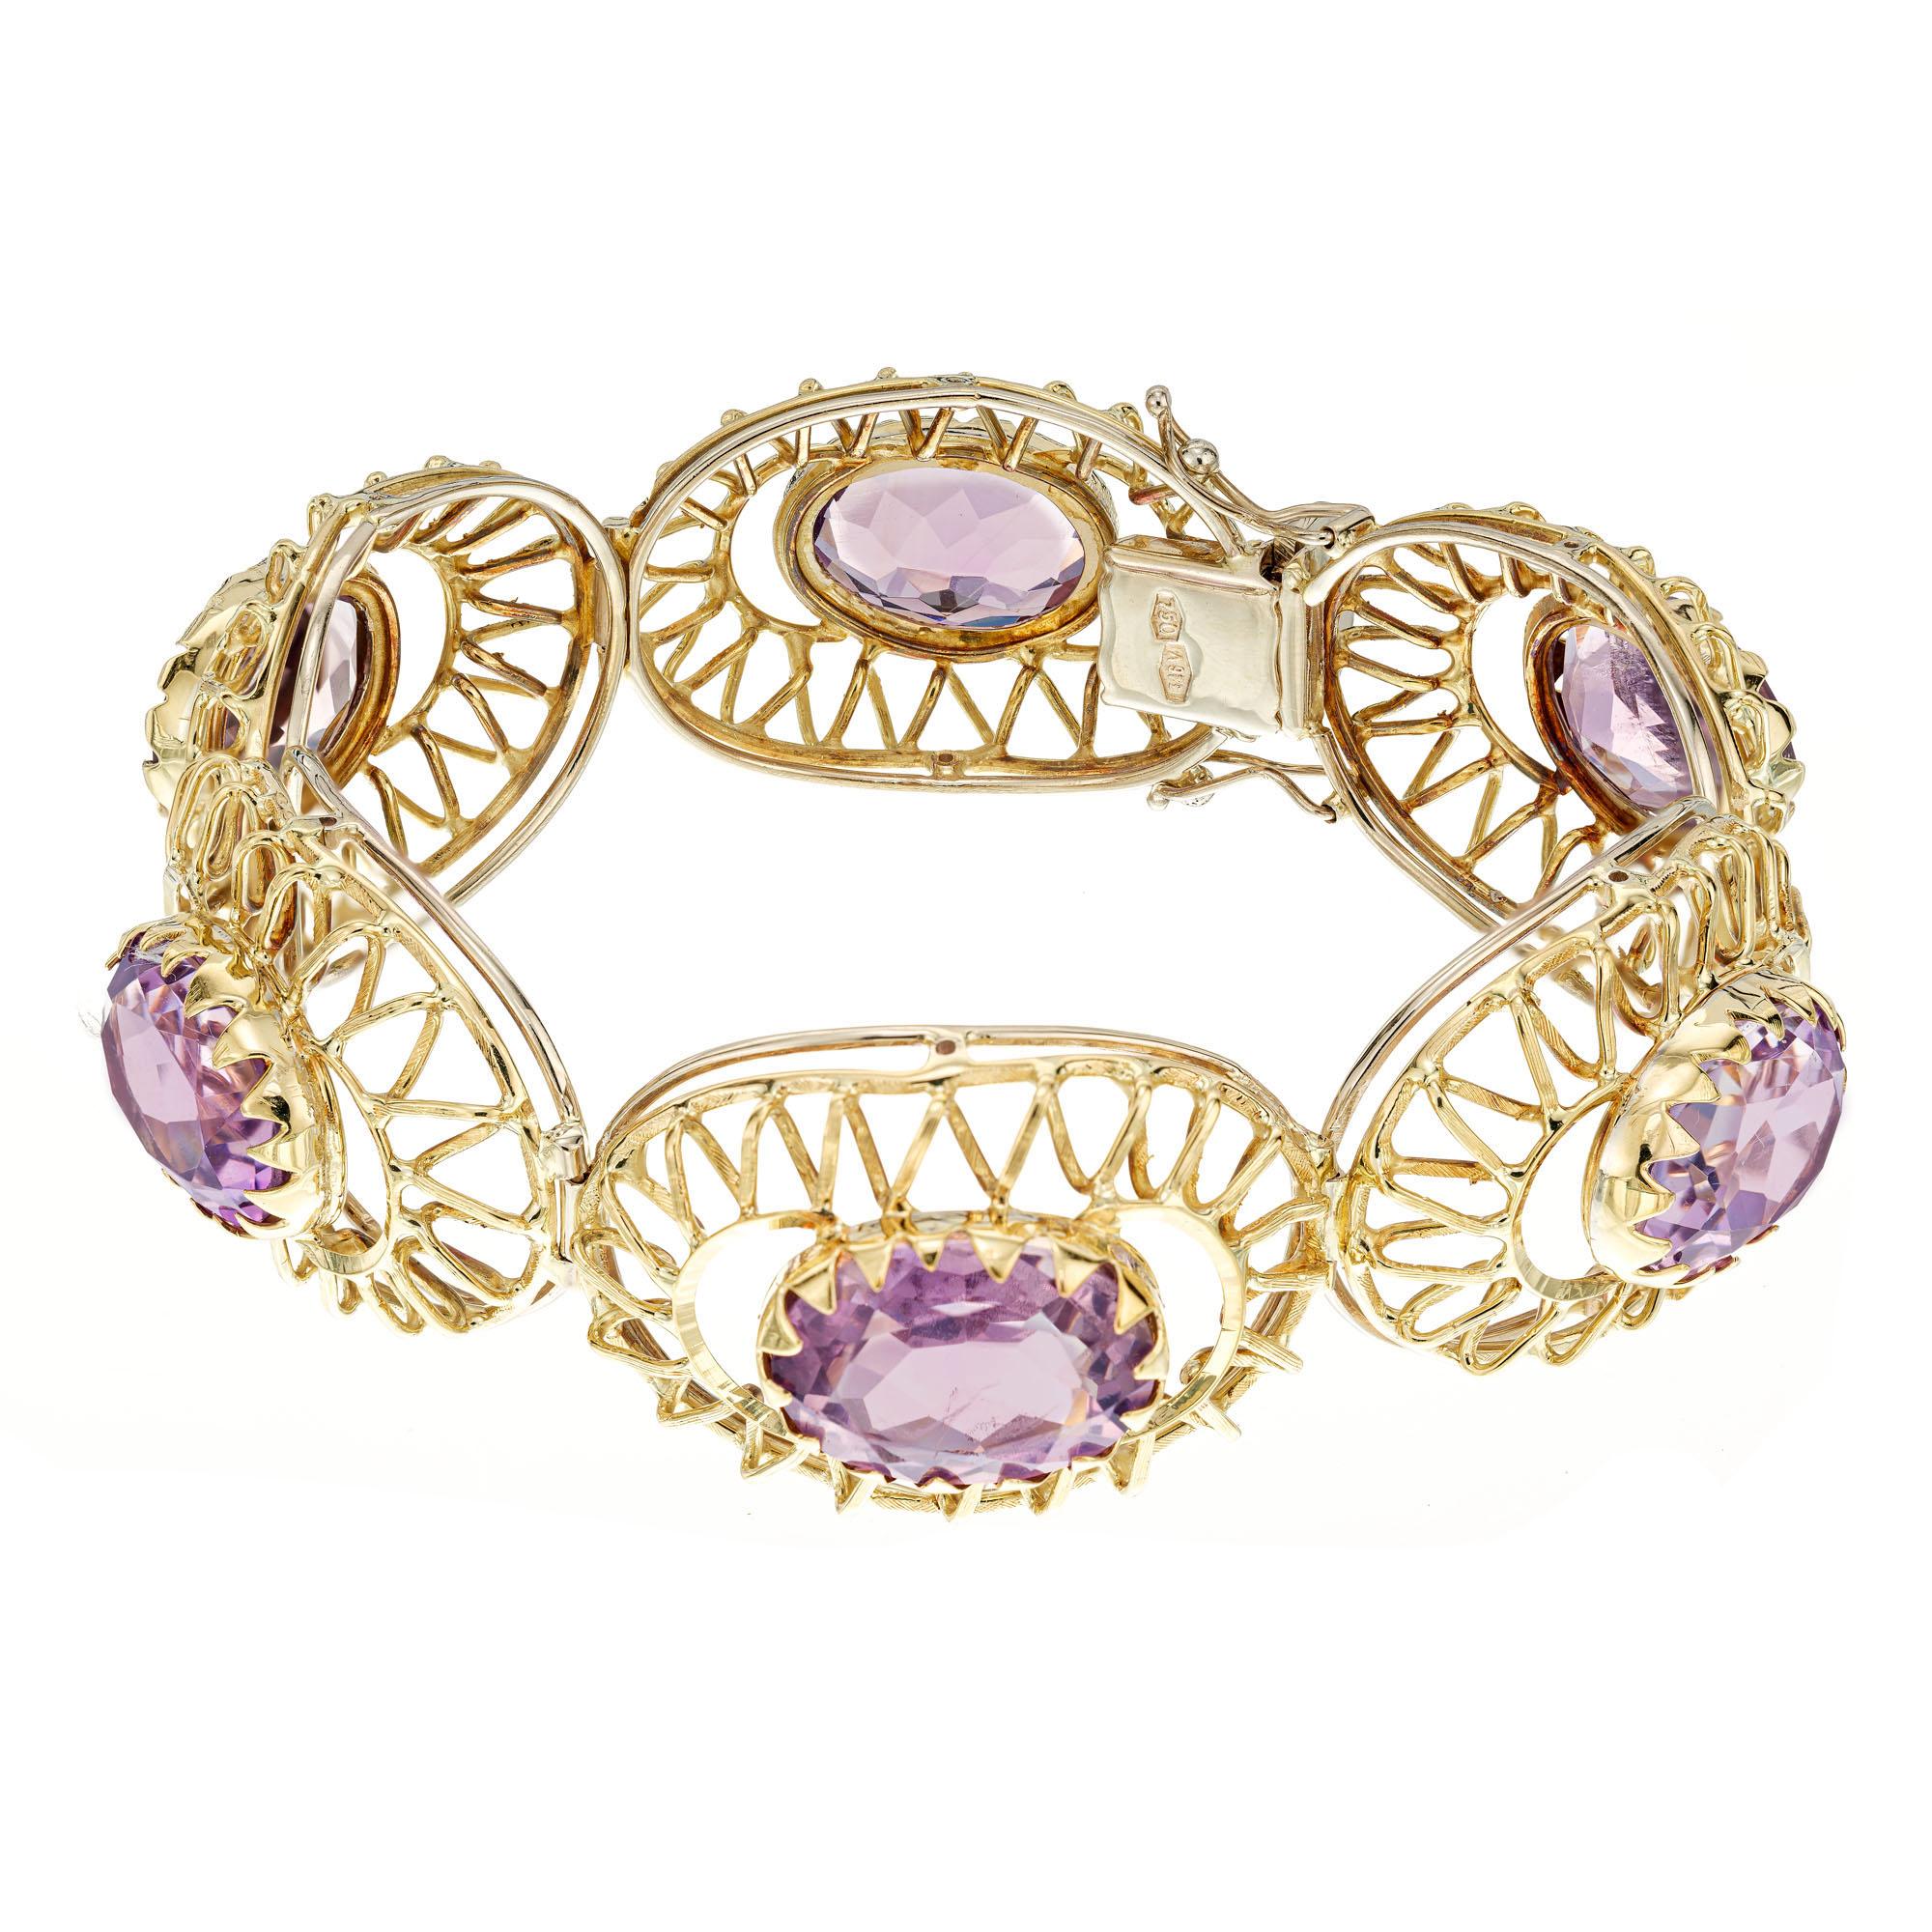 Mid-Century 1950's amethyst bracelet. 6 oval amethysts set in an open work 18k yellow gold bracelet. 7.25 inches in length. 

6 oval Amethyst approx. total weight 5.40cts.
18k yellow gold
Stamped: 750 18k
43.6 grams
Length:  7 ¼ inches
Width: 7/8